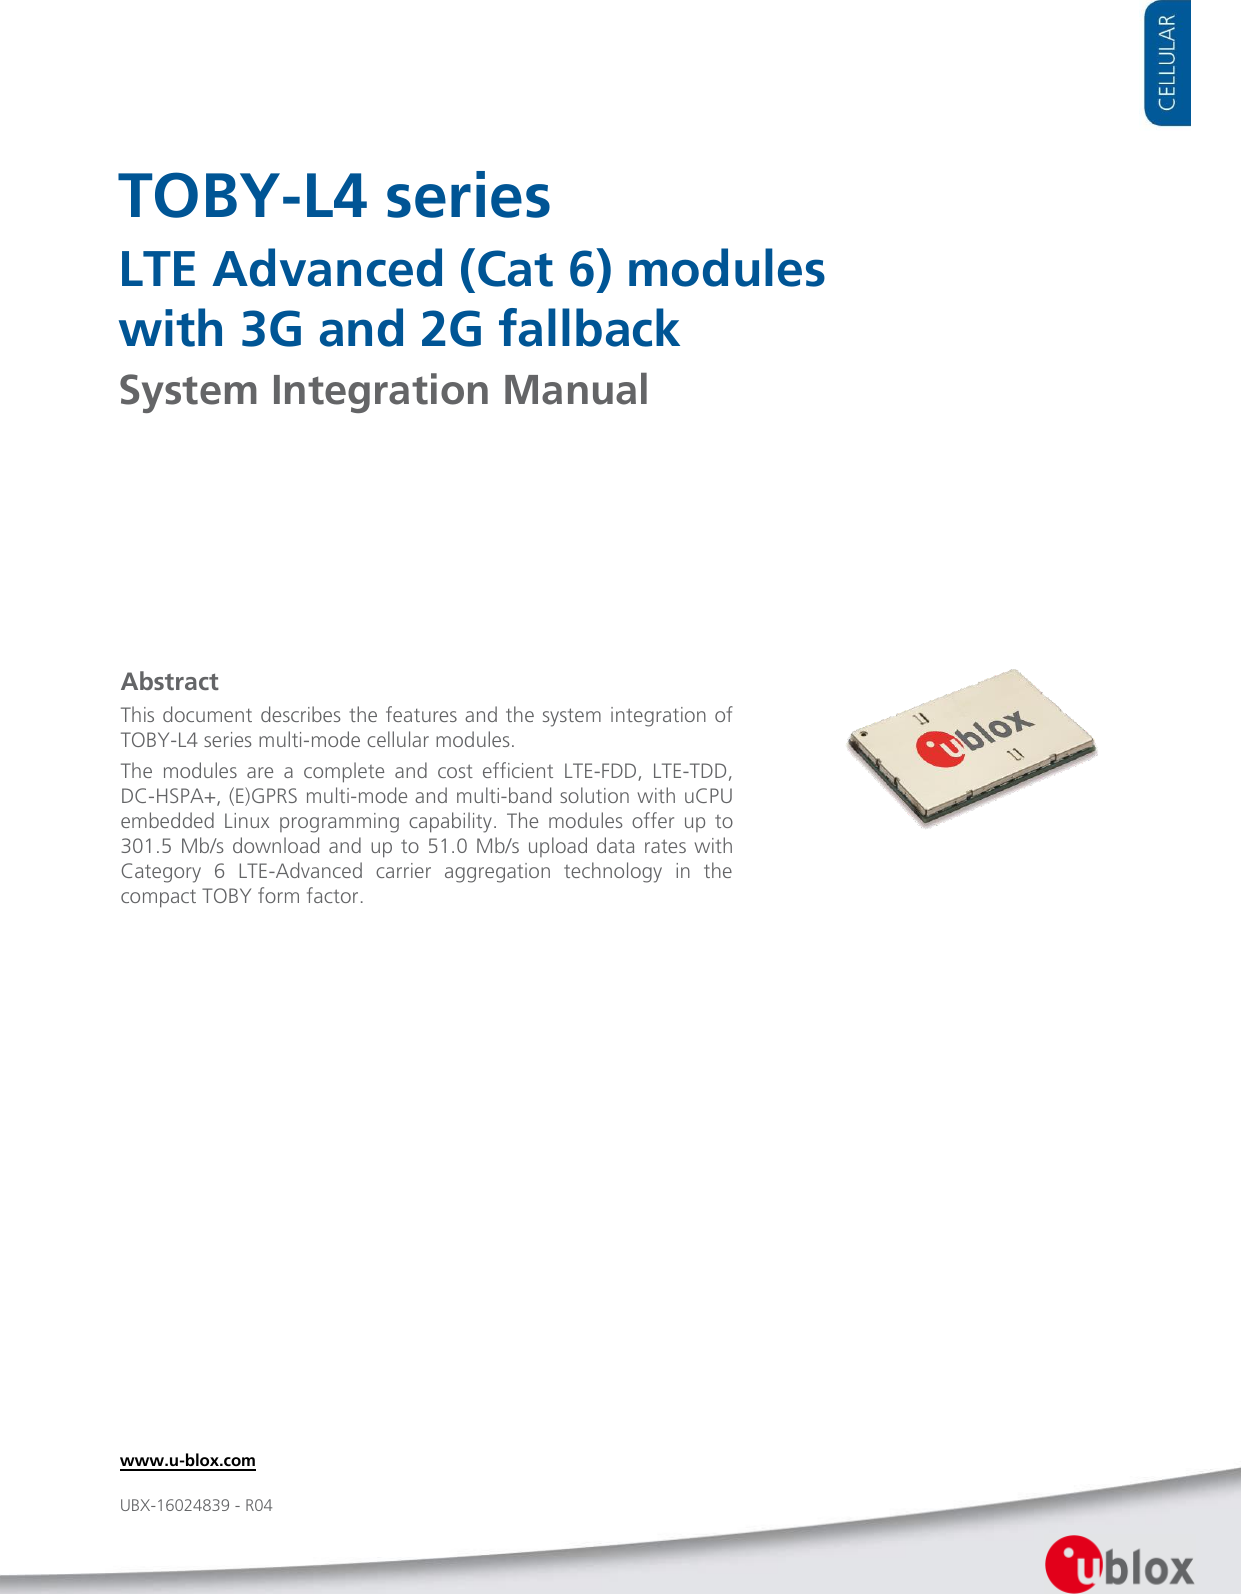     TOBY-L4 series LTE Advanced (Cat 6) modules  with 3G and 2G fallback System Integration Manual               Abstract This document describes the features and the system integration of TOBY-L4 series multi-mode cellular modules. The  modules  are  a  complete  and  cost  efficient  LTE-FDD,  LTE-TDD, DC-HSPA+, (E)GPRS multi-mode and multi-band solution with uCPU embedded  Linux  programming  capability.  The  modules  offer  up  to 301.5 Mb/s  download and  up to 51.0 Mb/s upload data rates with Category  6  LTE-Advanced  carrier  aggregation  technology  in  the compact TOBY form factor. www.u-blox.com UBX-16024839 - R04 